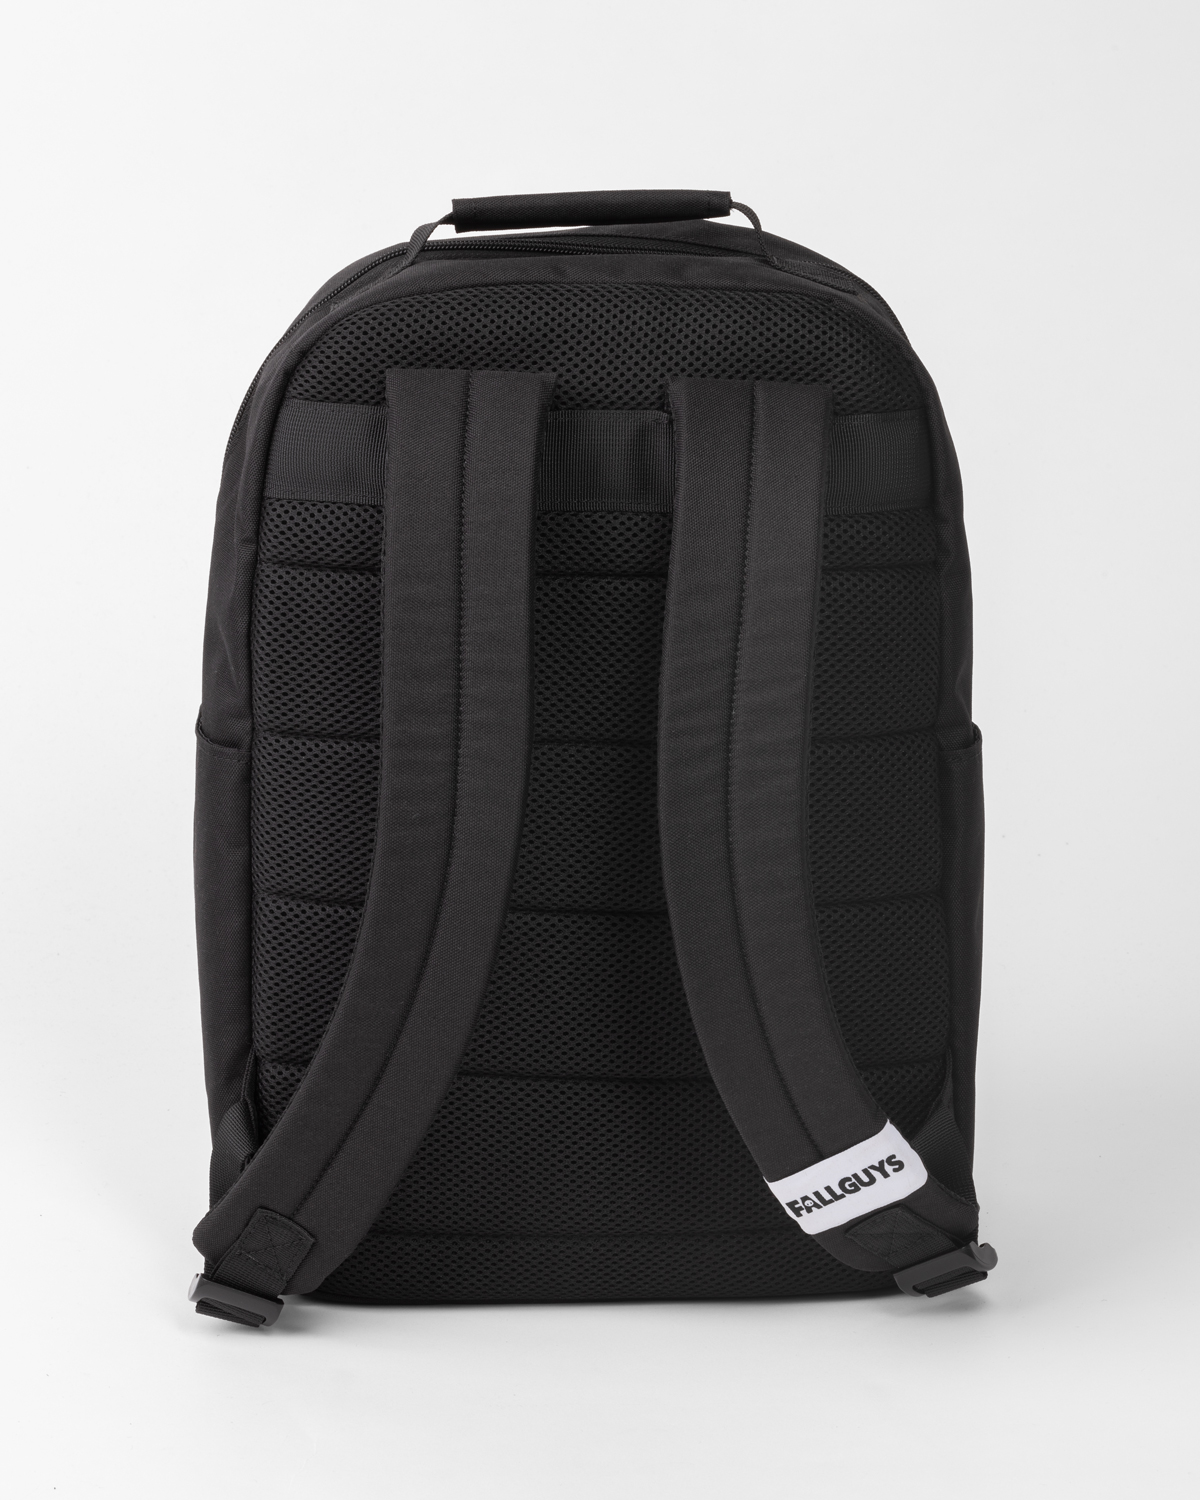 ITEMLAB Fall Guys Backpack \